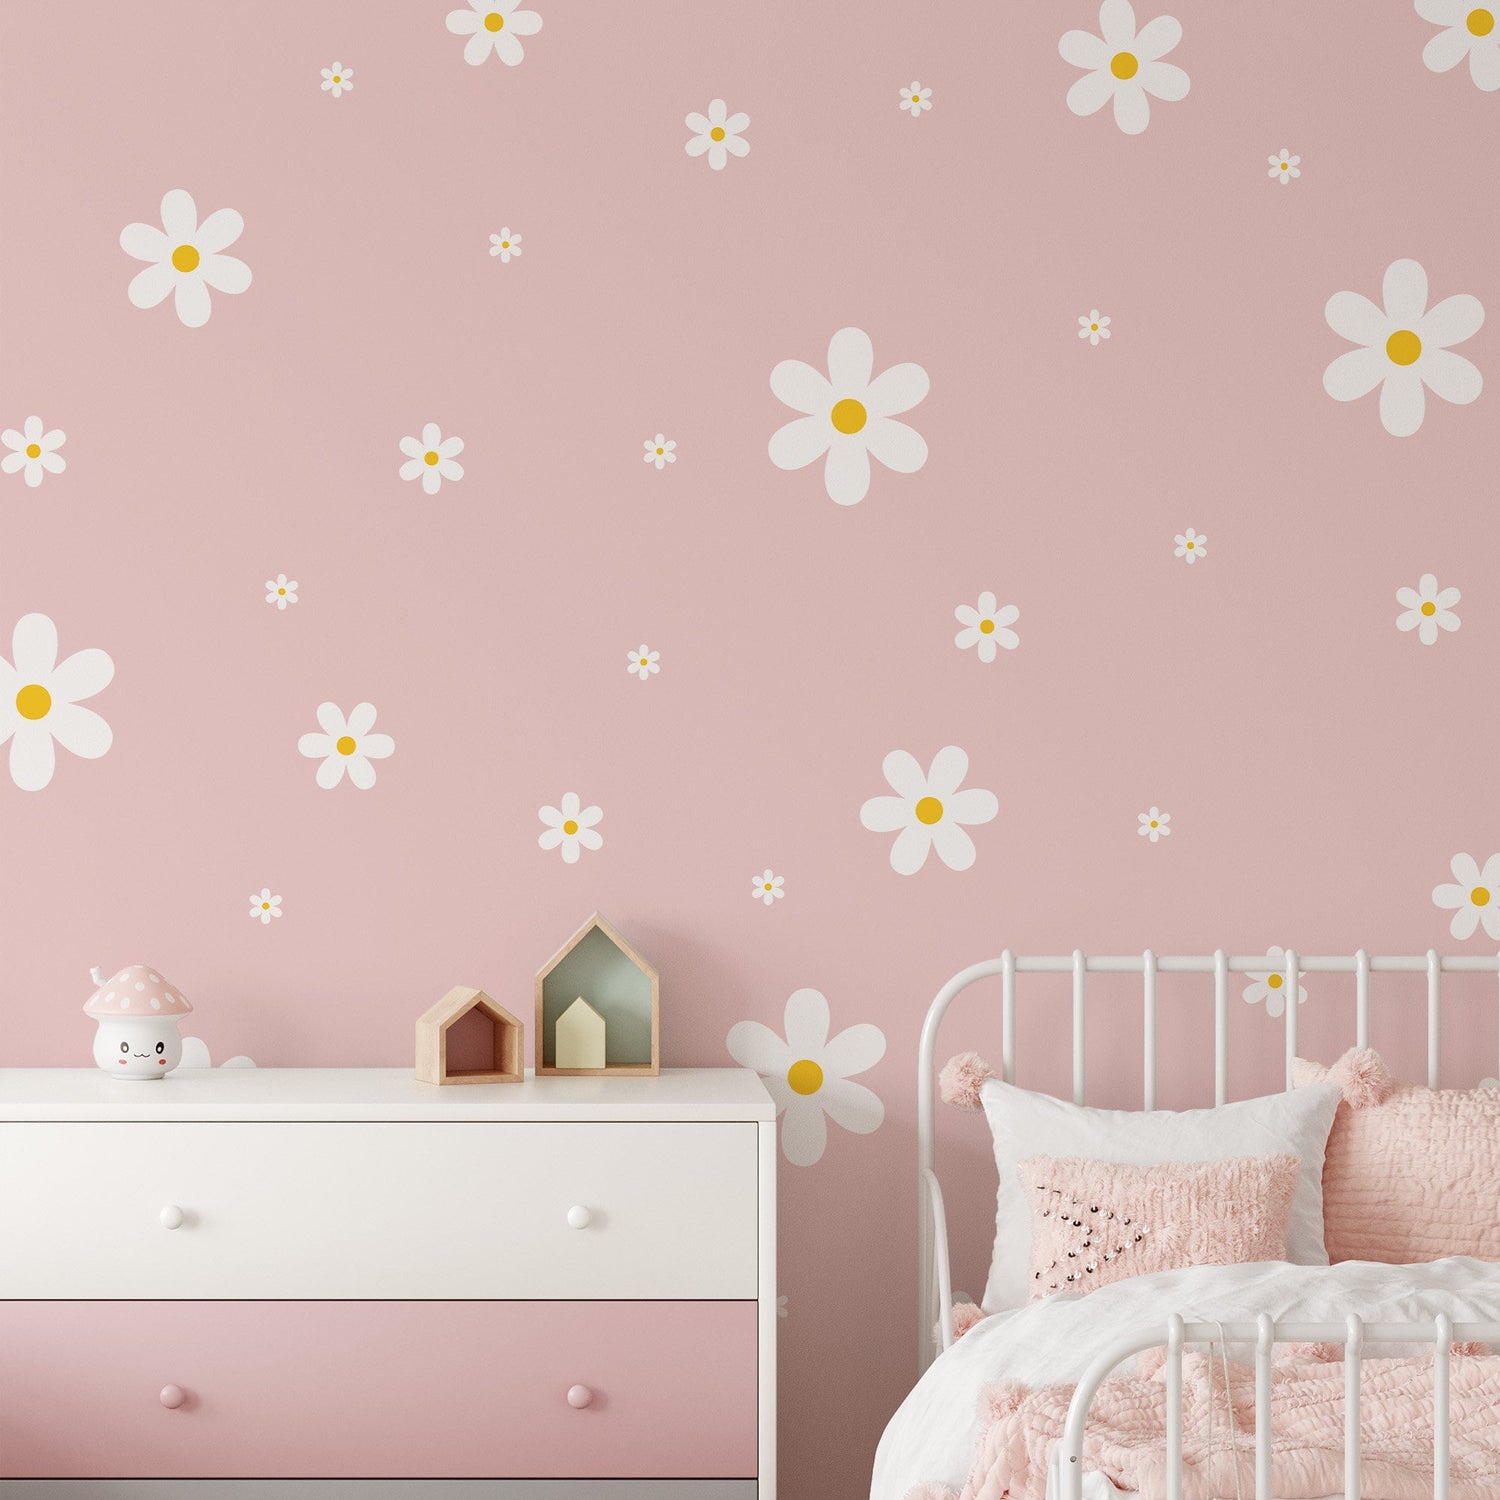 Daisy Stickers, Flower Decals, Nursery Decor, Removable Wall Decals, Polka Dot Decals